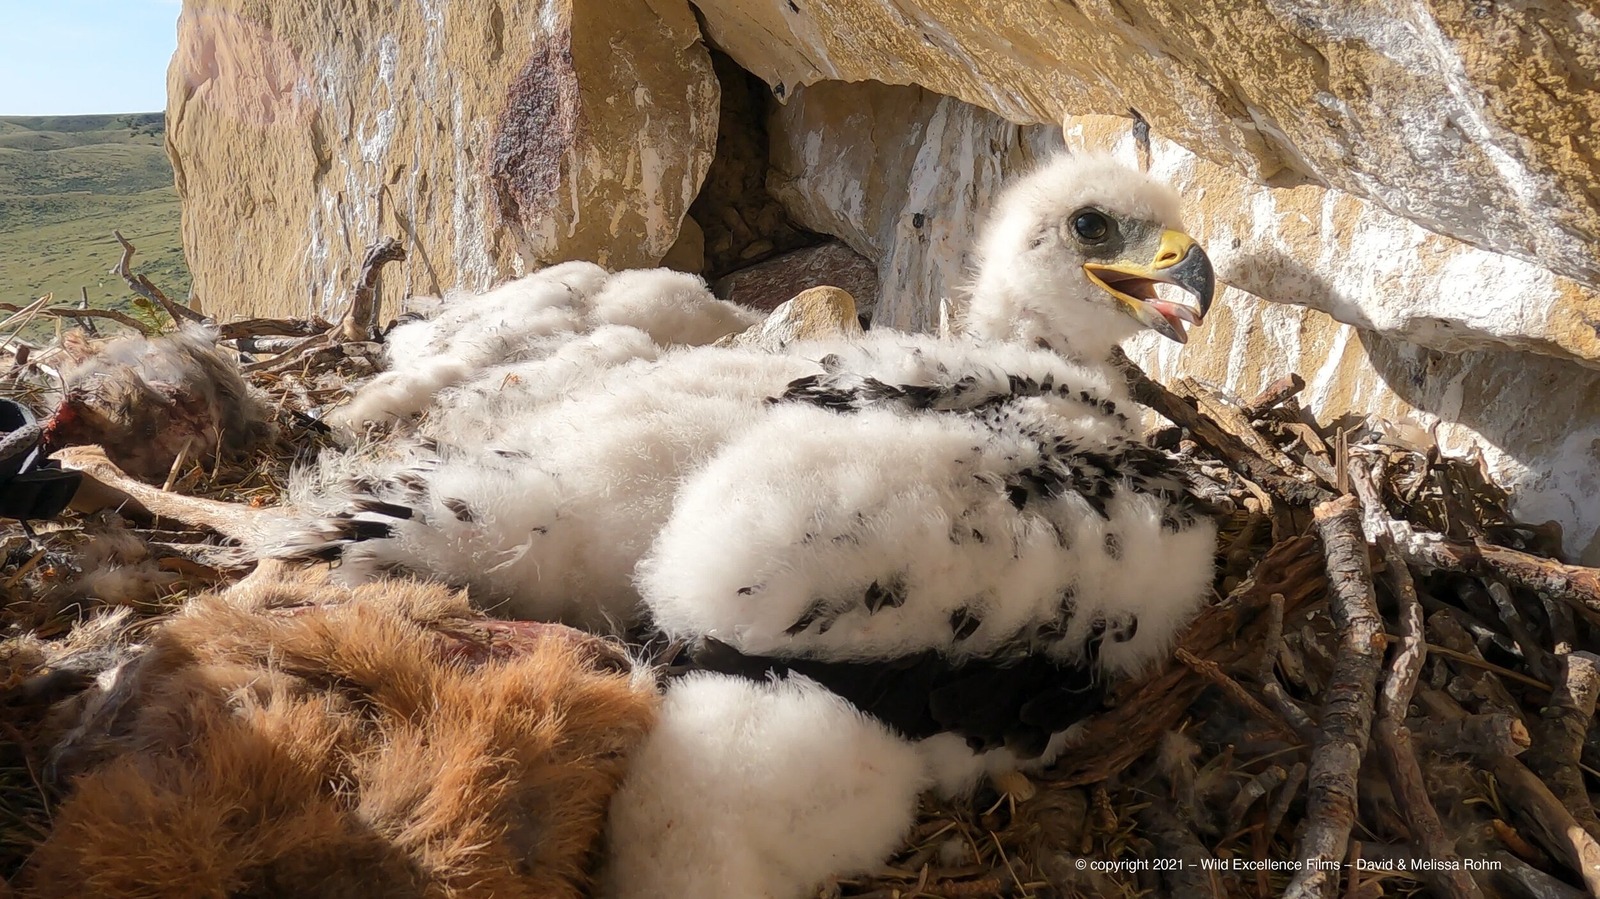 An eaglet on the nest, surrounded by a banquet of edibles that its parent brought back from successful hunting and scavenging trips.  Photo courtesy Wild Excellence Films